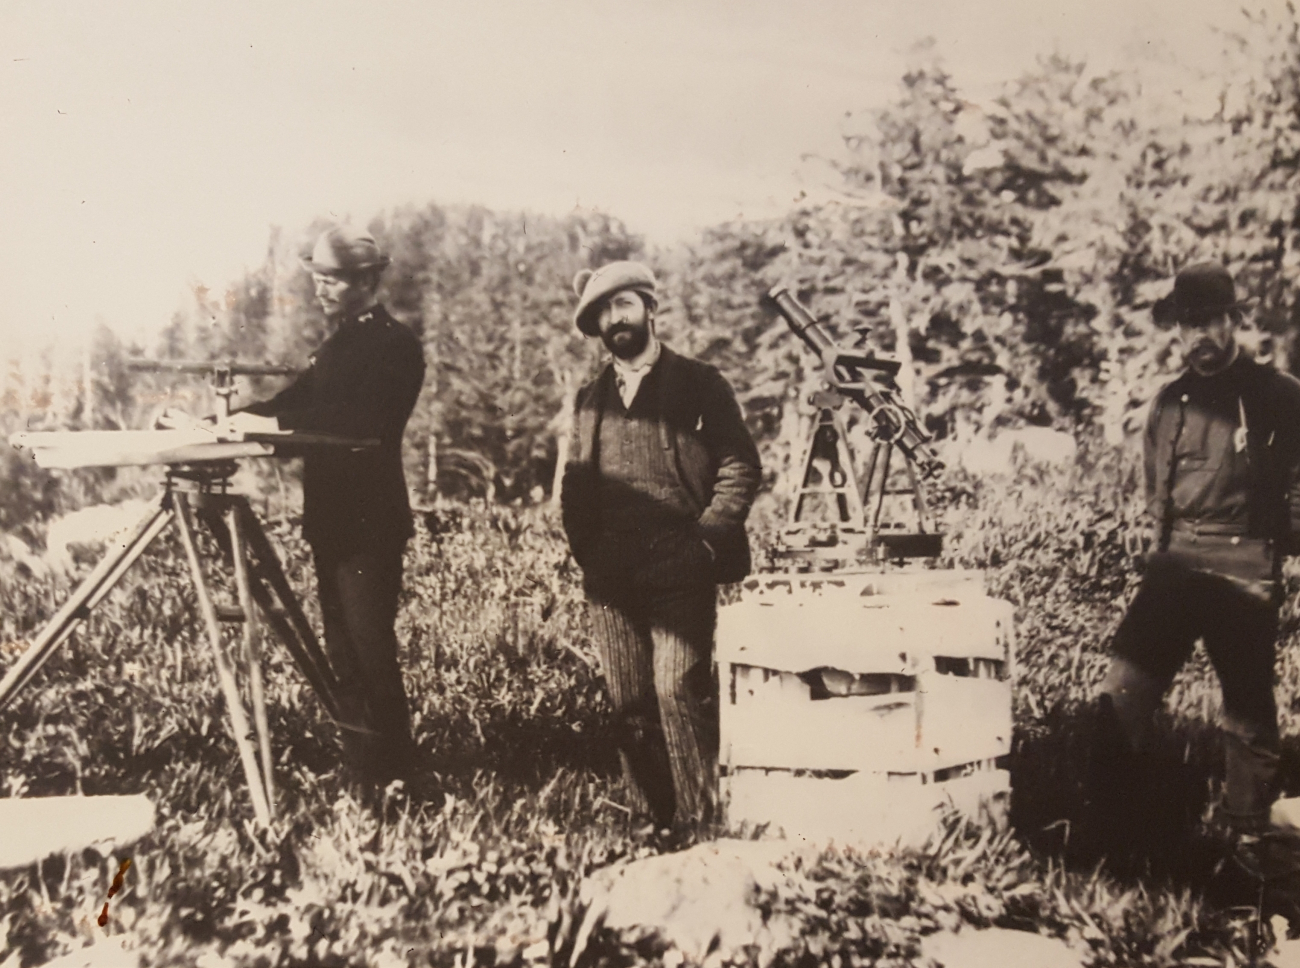 Unidentified surveyors conducting astronomic observations for longitude withDavidson Meridian Instrument